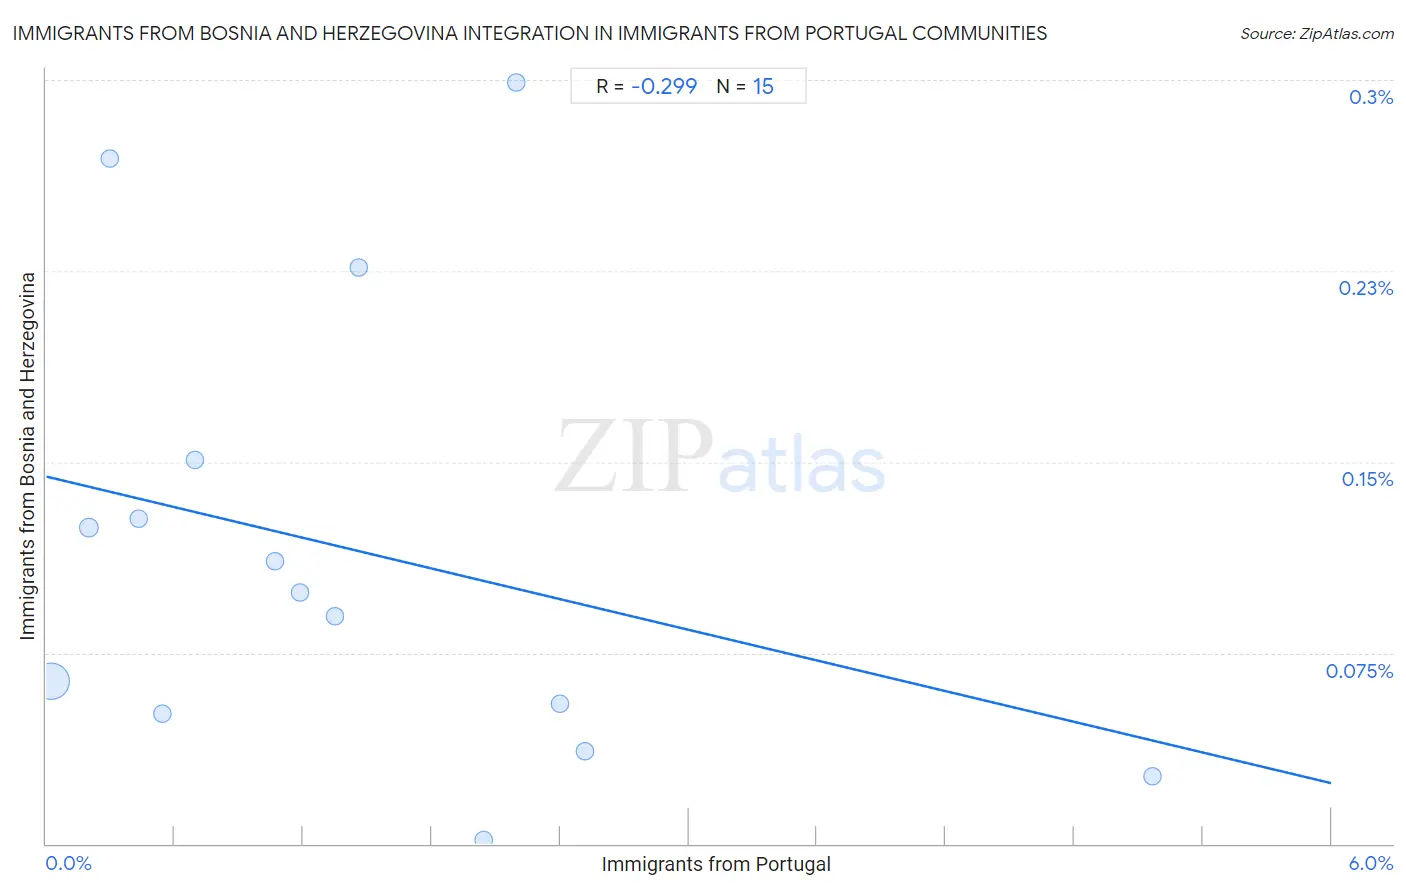 Immigrants from Portugal Integration in Immigrants from Bosnia and Herzegovina Communities